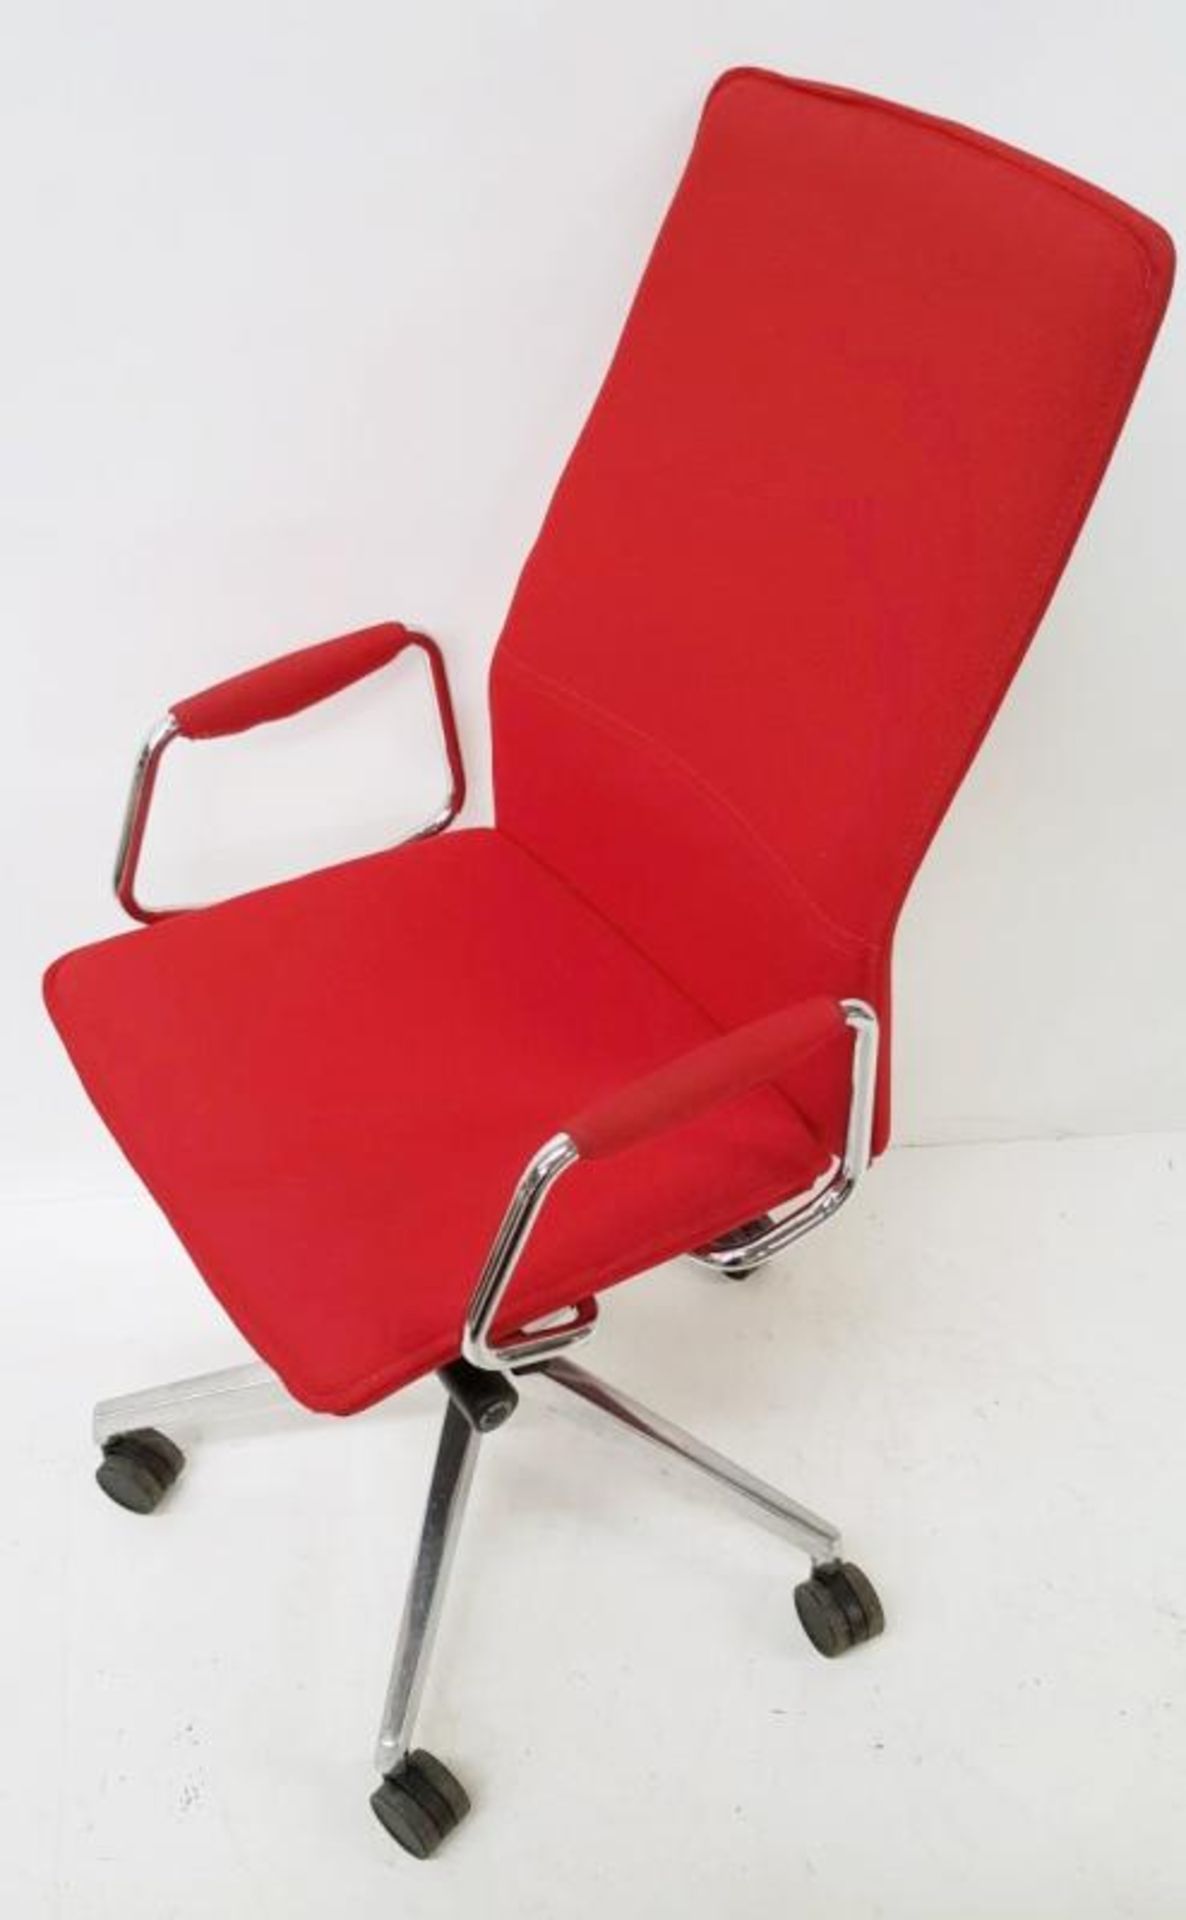 1 x 'Sven Christiansen' Premium Designer High-back Office Chair In Red (HBB1HA) - Used, In Very Good - Image 5 of 7